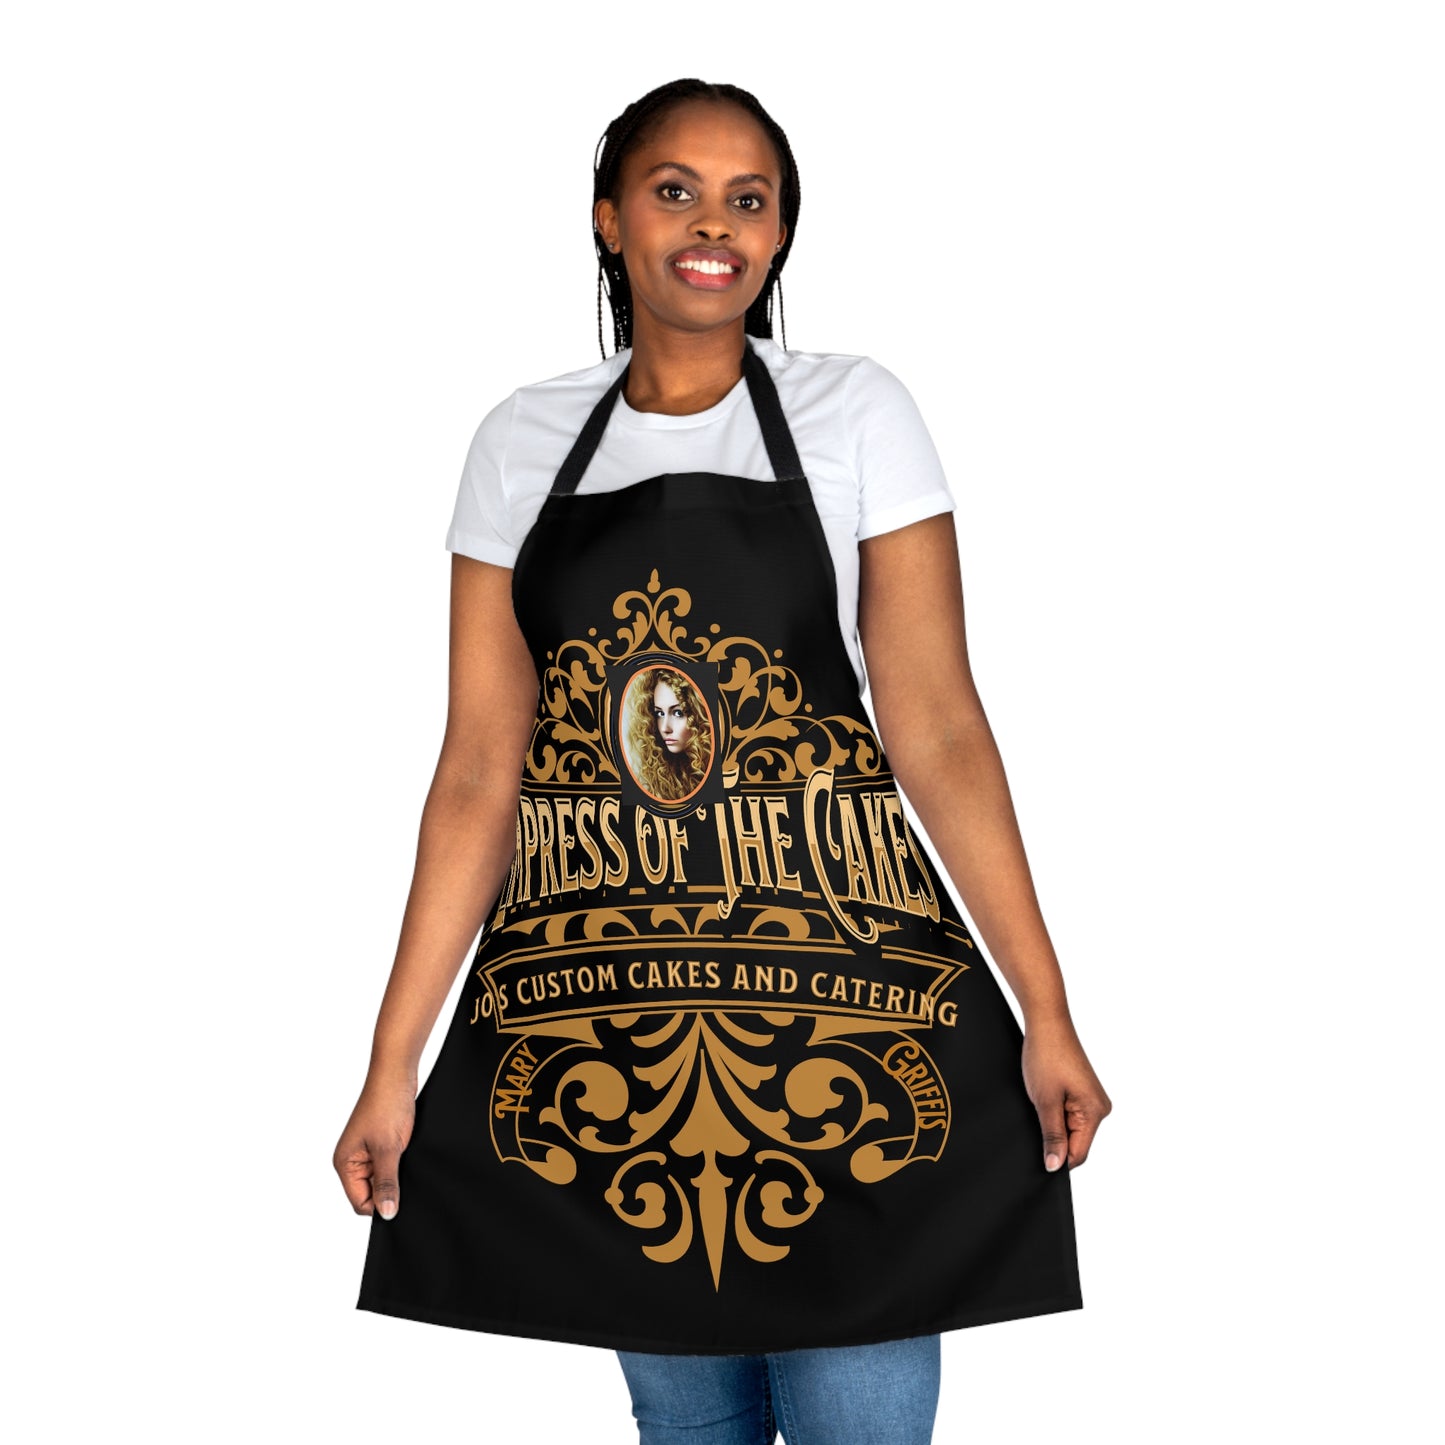 Empress of the Cakes - Apron (AOP)